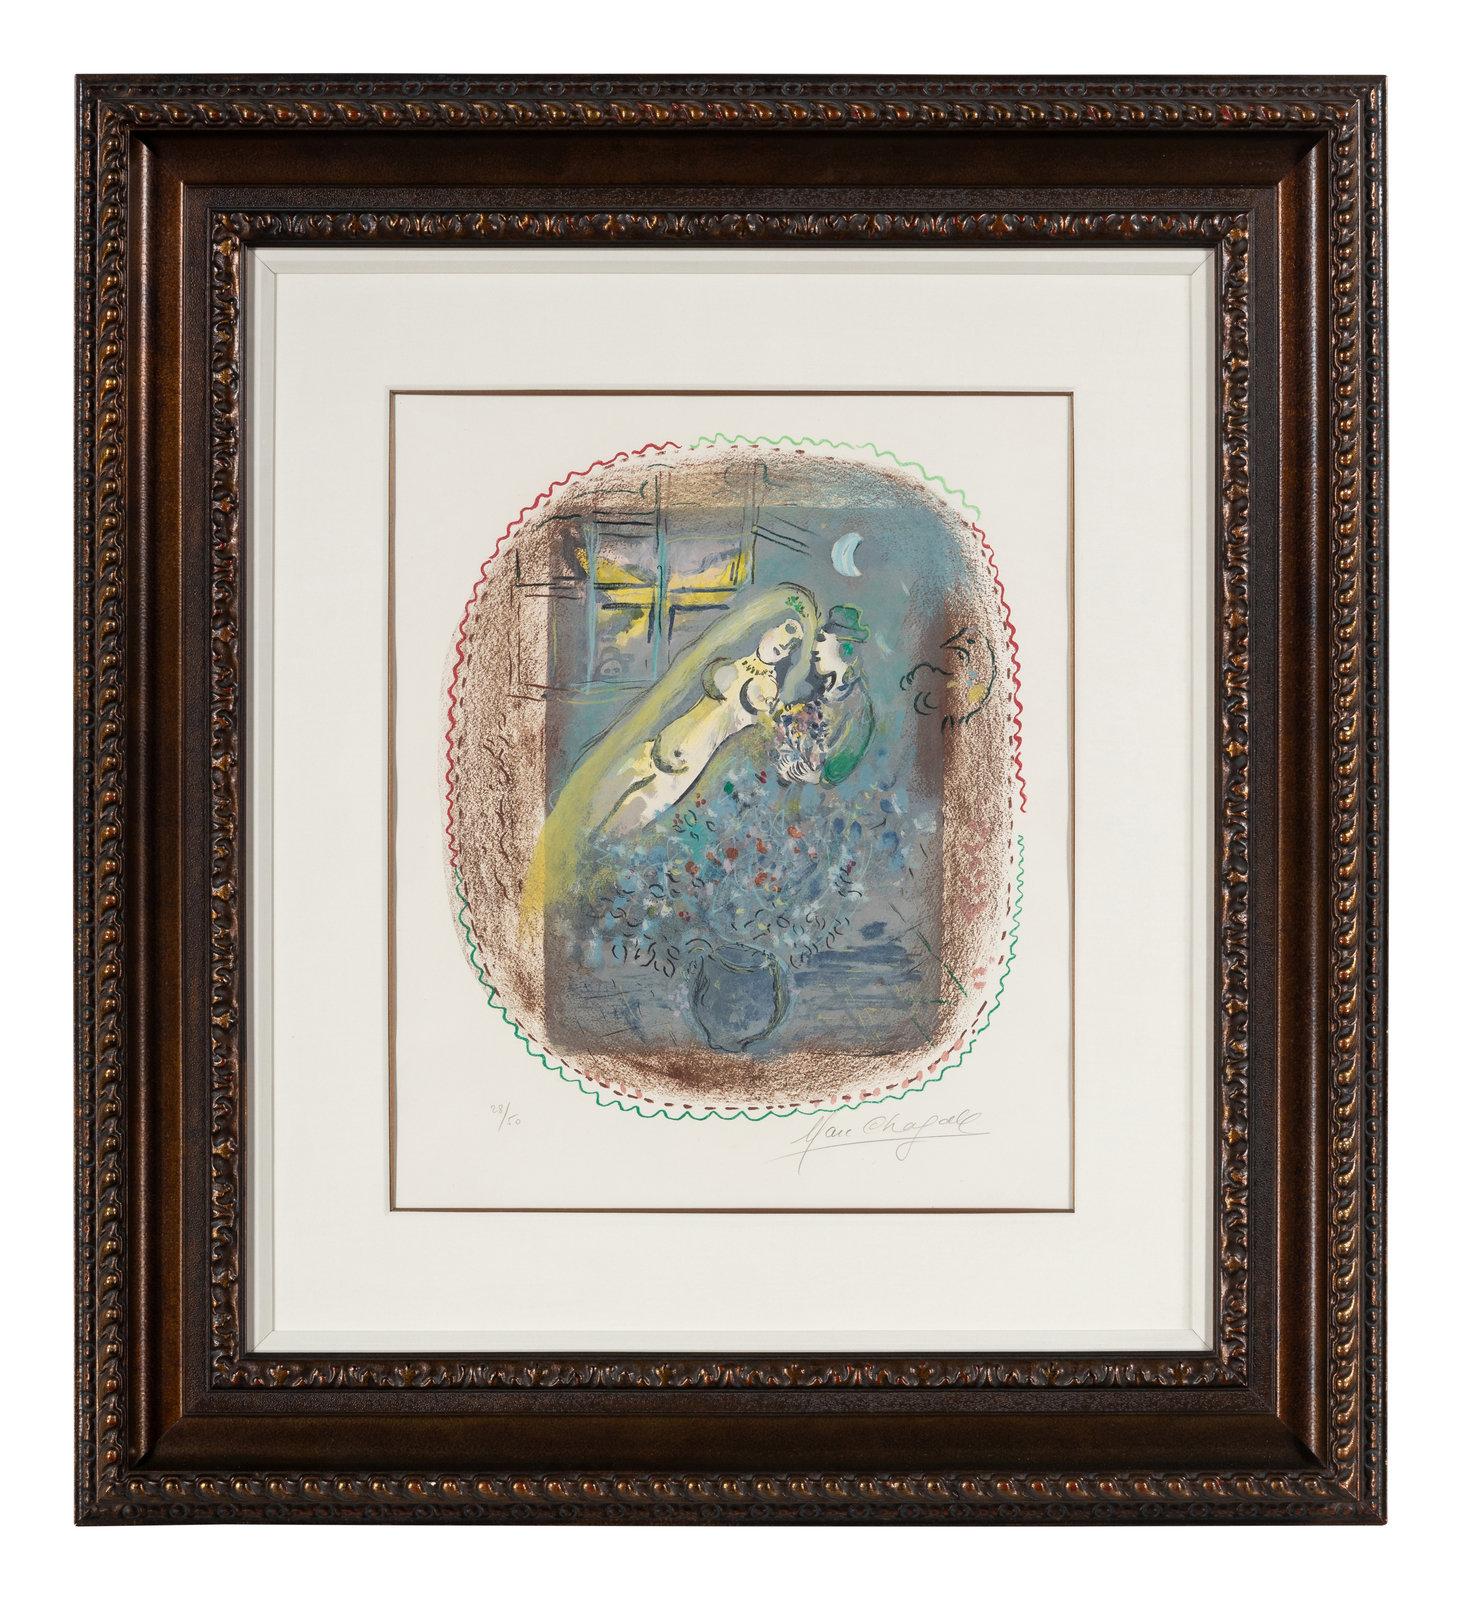 Marc Chagall  (French/Russian, 1887-1985)

"Dédicace" 

1968
Color lithograph

signed and numbered 28/50 in pencil
Image: 17 7/8 x 15 1/4 inches.
Framed: 38 x 34 1/4 x 2 1/4 inches.
Sheet: 24 3/8 x 18 5/8 inches.
Literature:
Mourlot 557

Provenance: